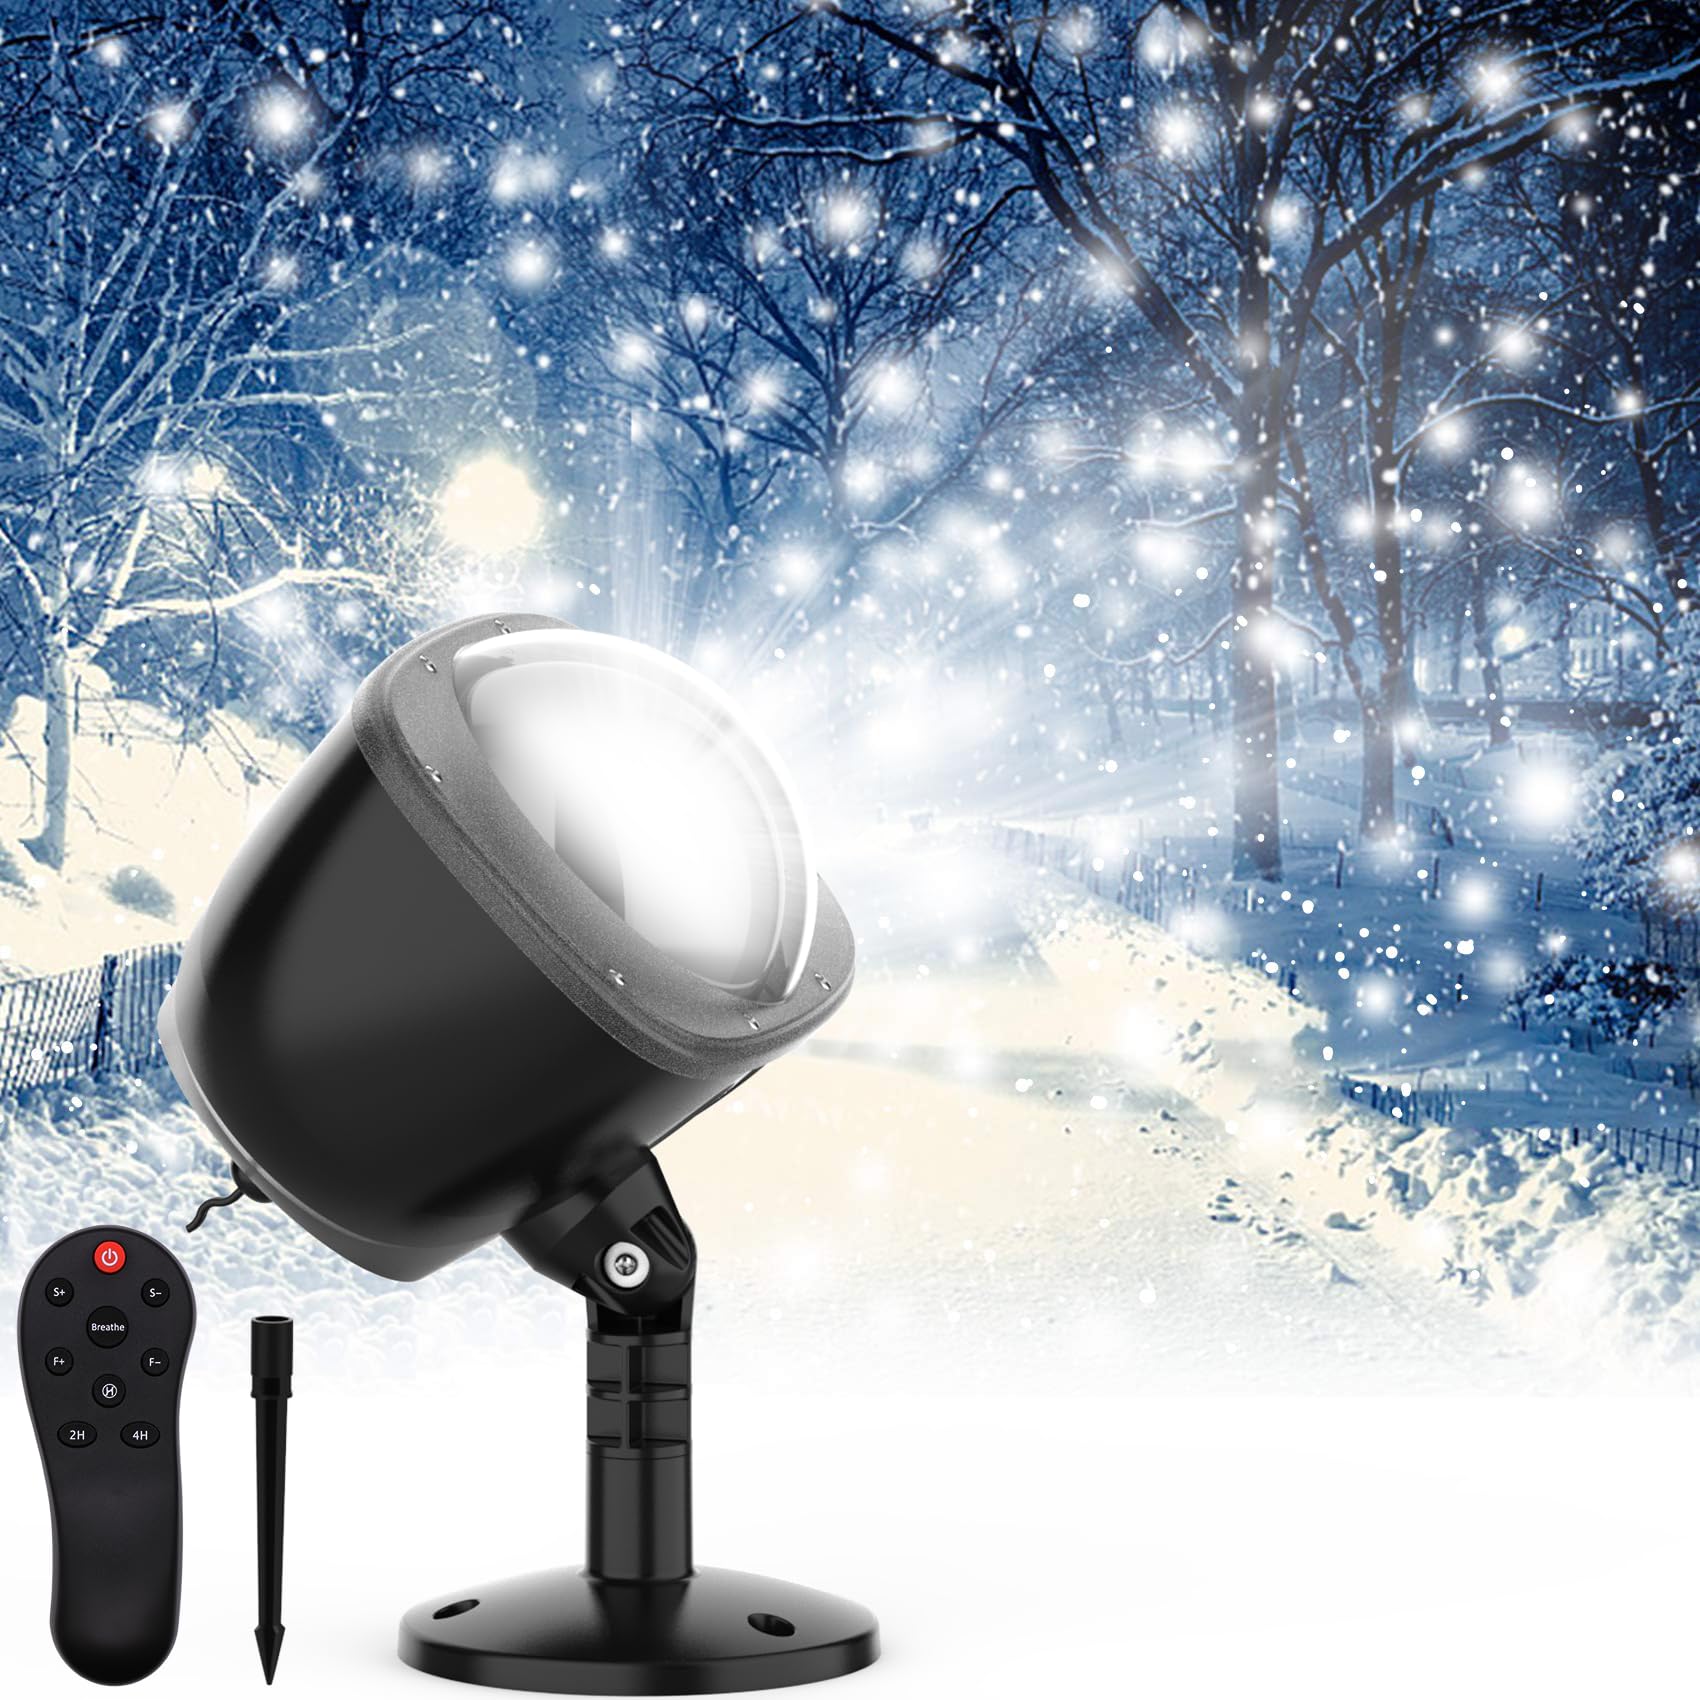 SOMKTN Christmas Snowfall Light Projector Outdoor,Snow Falling Projector Lamp Dynamic Snow Effect Christmas Dot Decorations Lighting for Xmas House.Garden Yard, Party,Club, Landscape